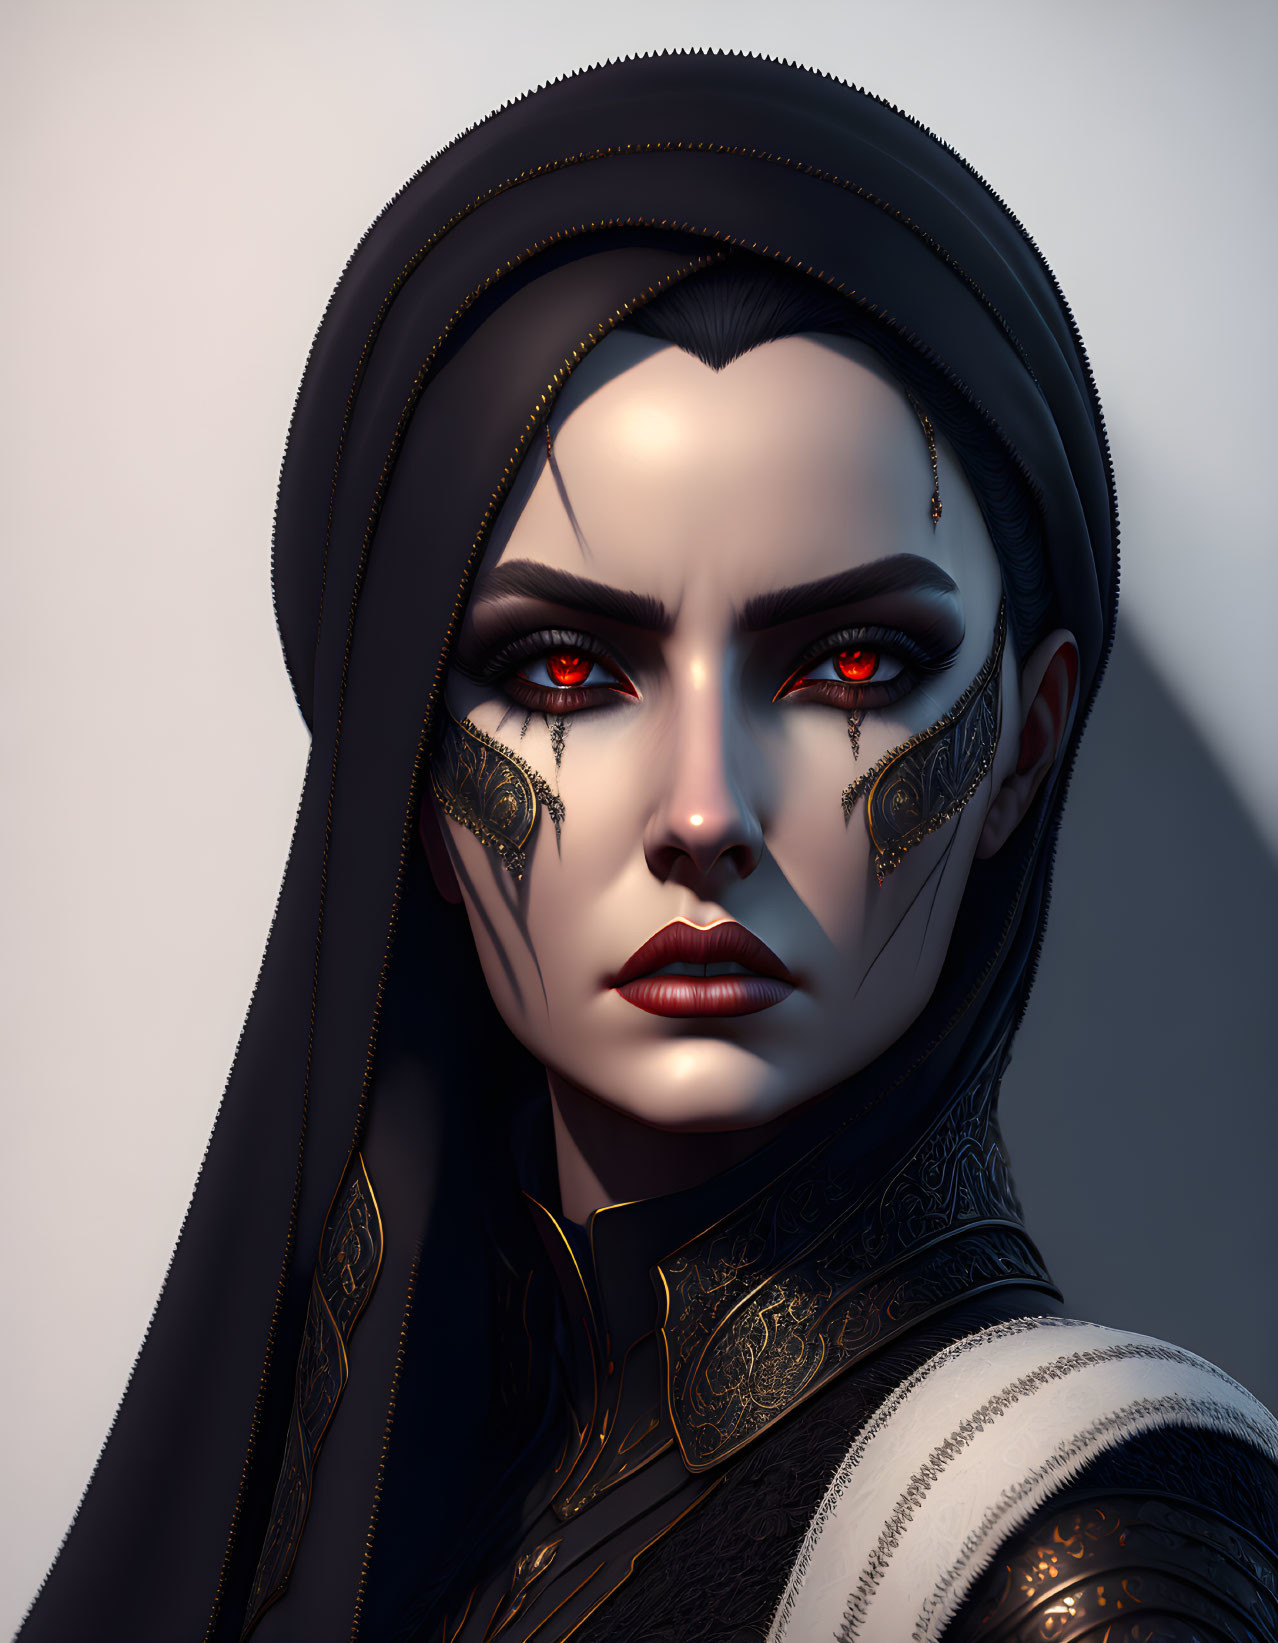 Digital portrait of woman with red eyes and black facial tattoos in hood and dark attire on light backdrop